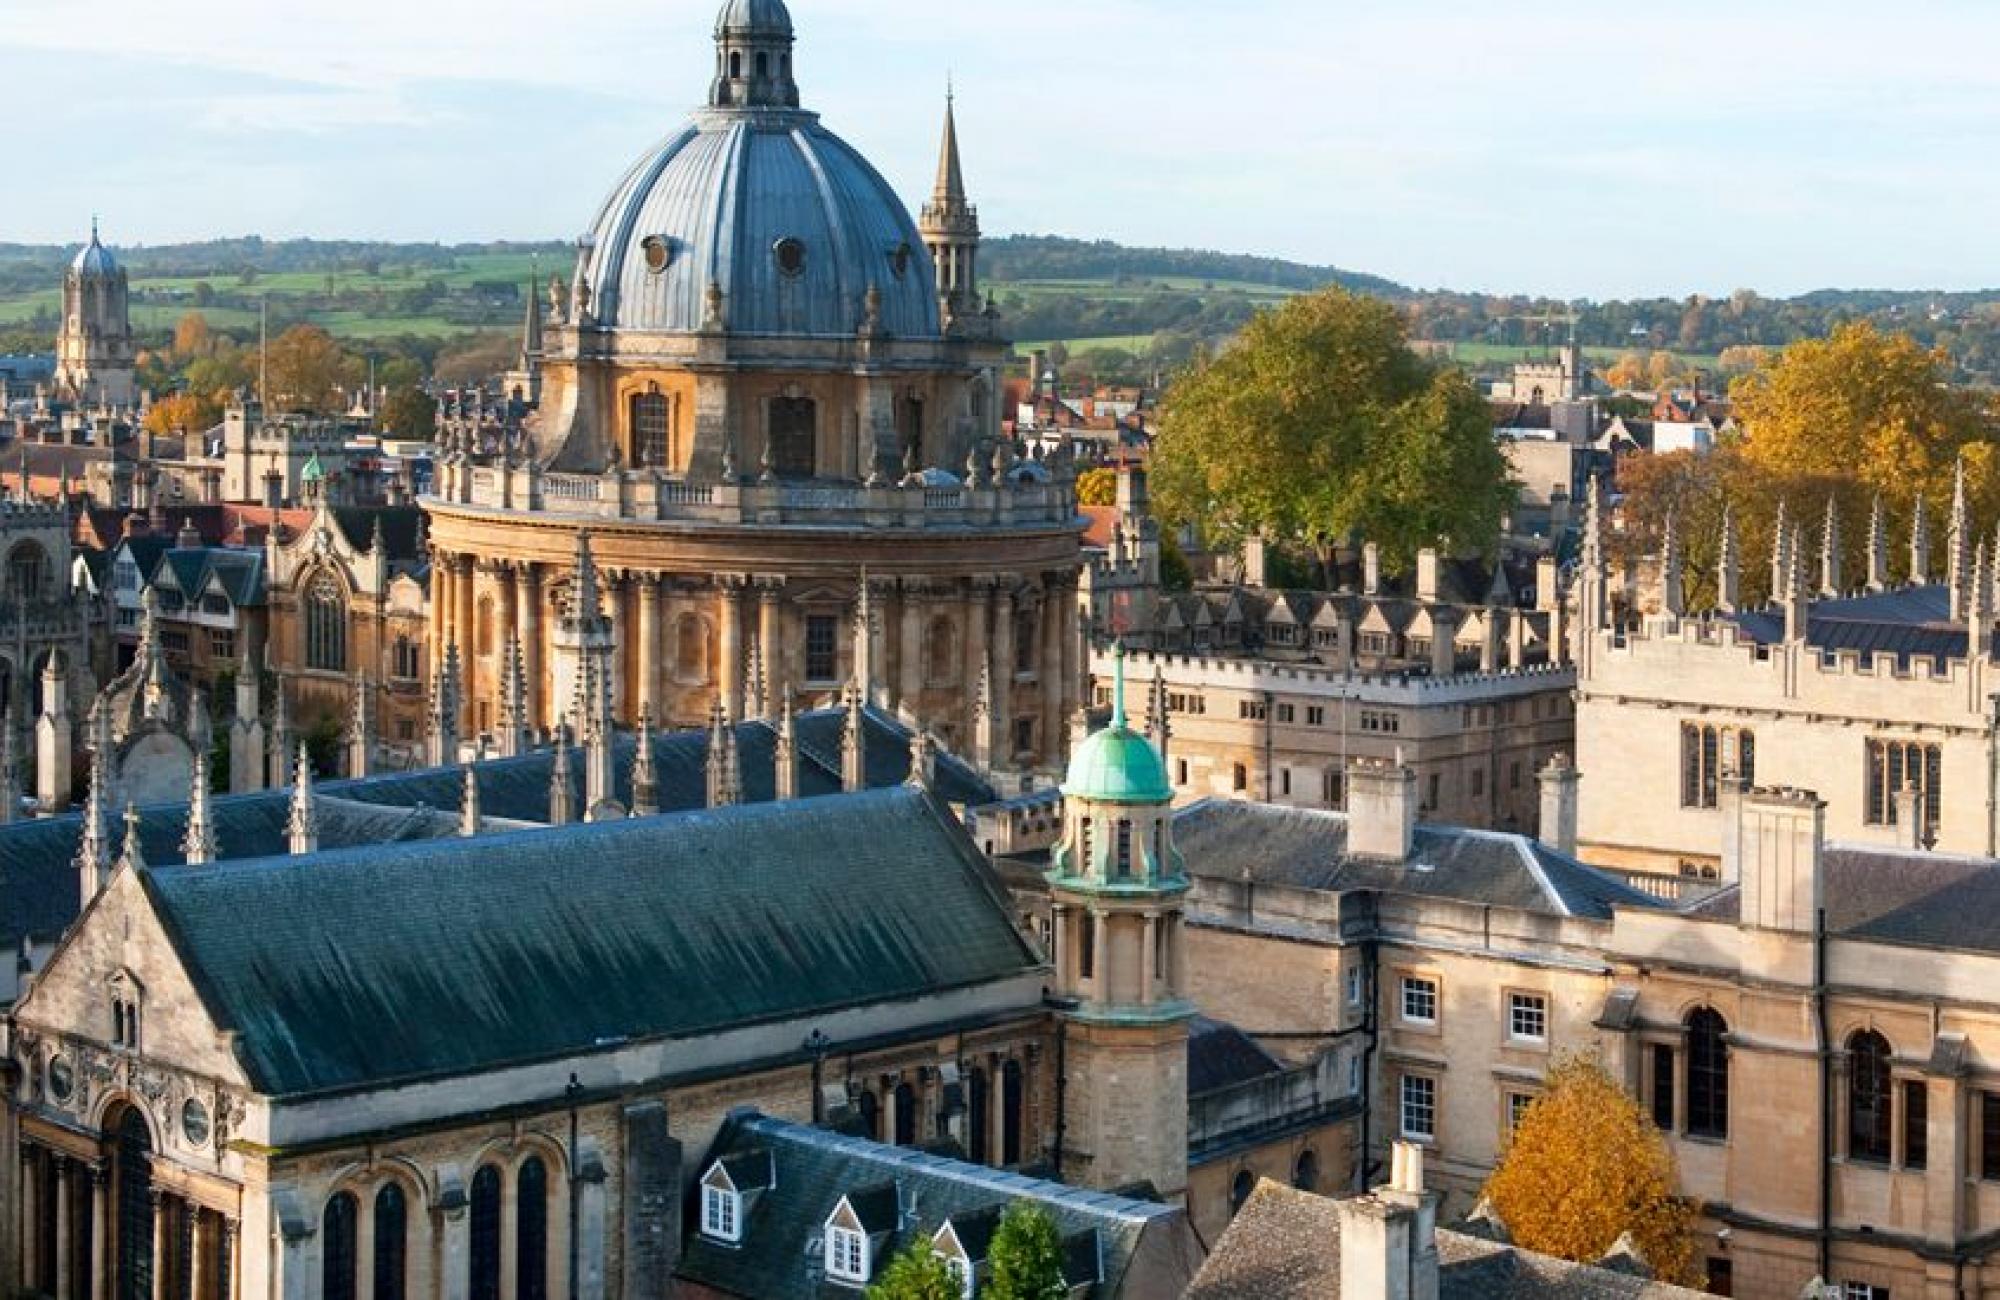 Mind & Behaviour Research Group is housed at the University of Oxford